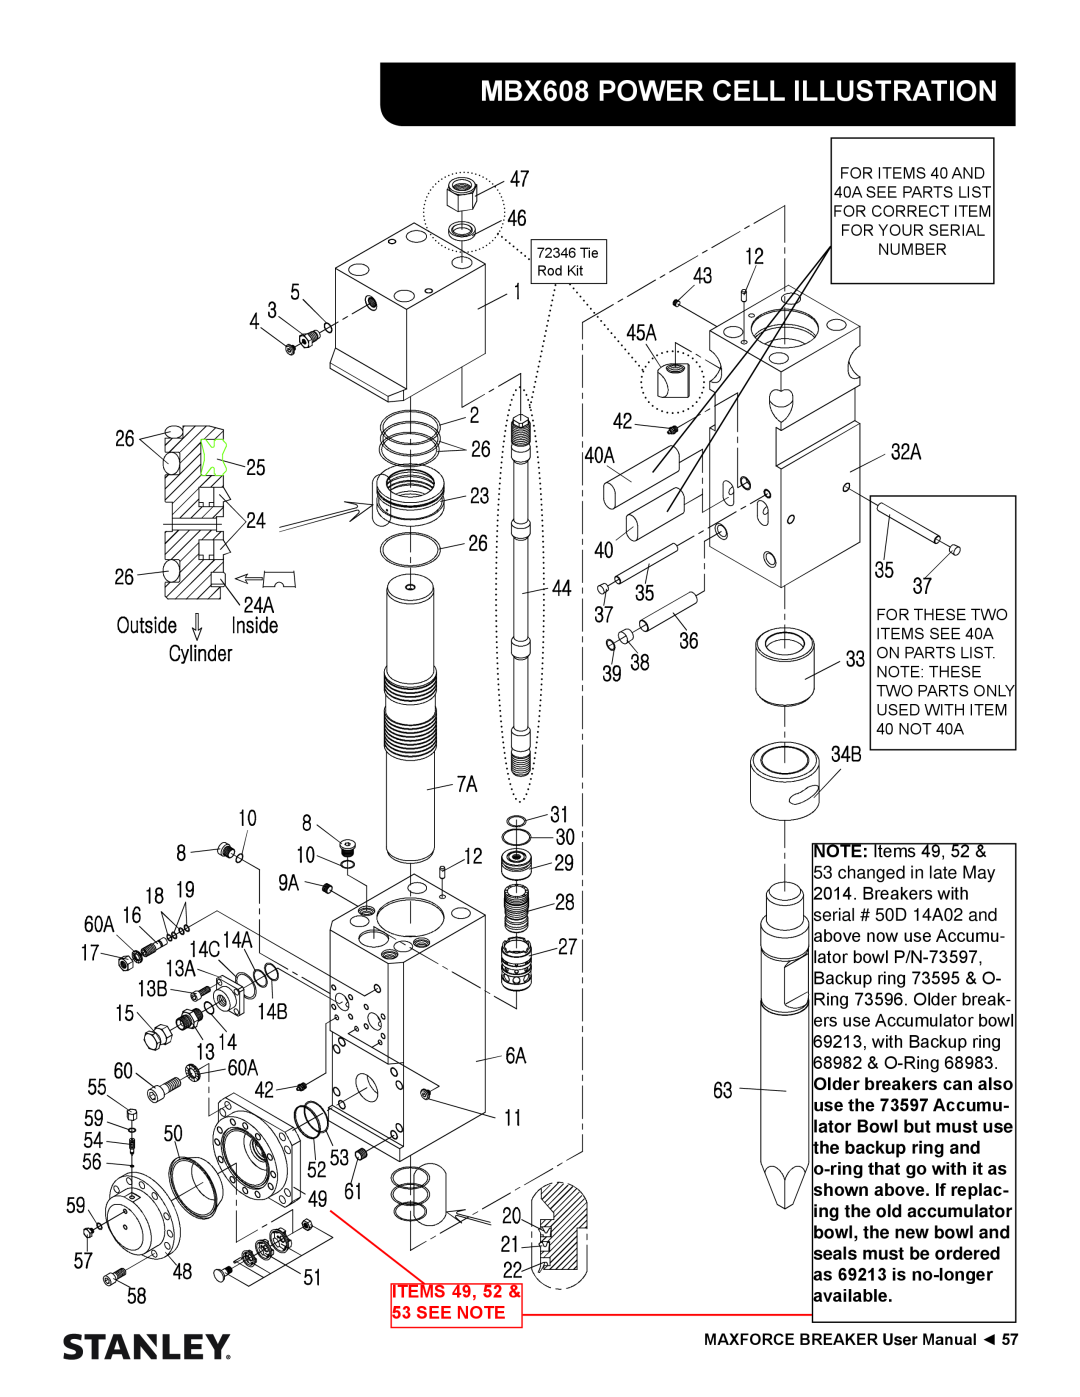 Stanley Black & Decker MBX138 thru MBX608 user manual MBX608 POWER CELL ILLUSTRATION, ITEMS 49, 52 & 53 SEE NOTE 